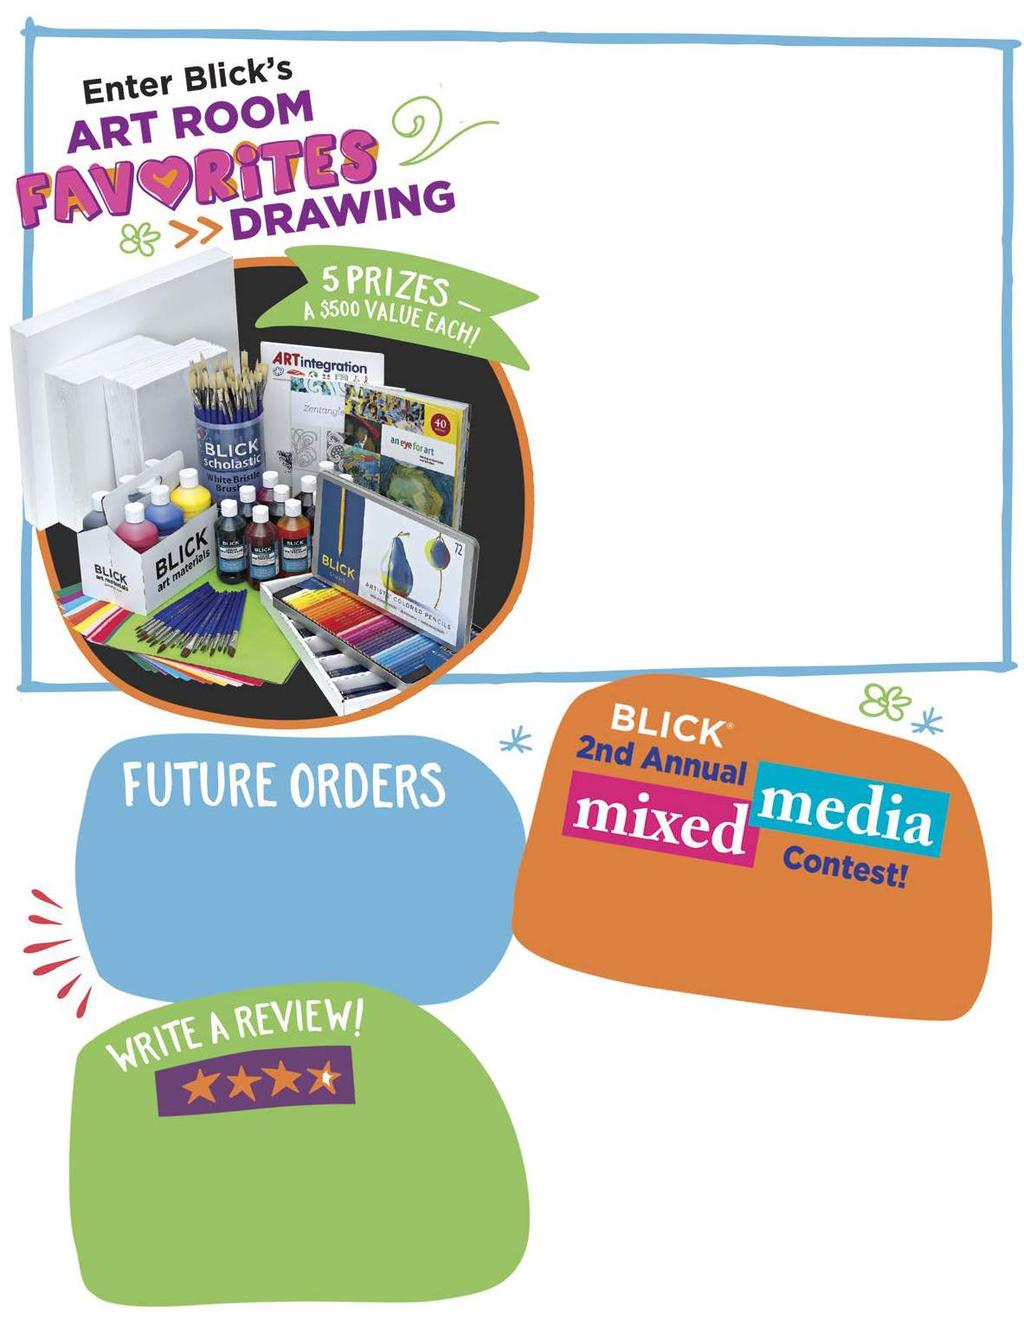 TEACHERS & PROGRAM LEADERS! Enter to WIN A FREE KIT packed with some of our most popular art room essentials. Entering is easy! Just fill out your contact information at DickBlick.